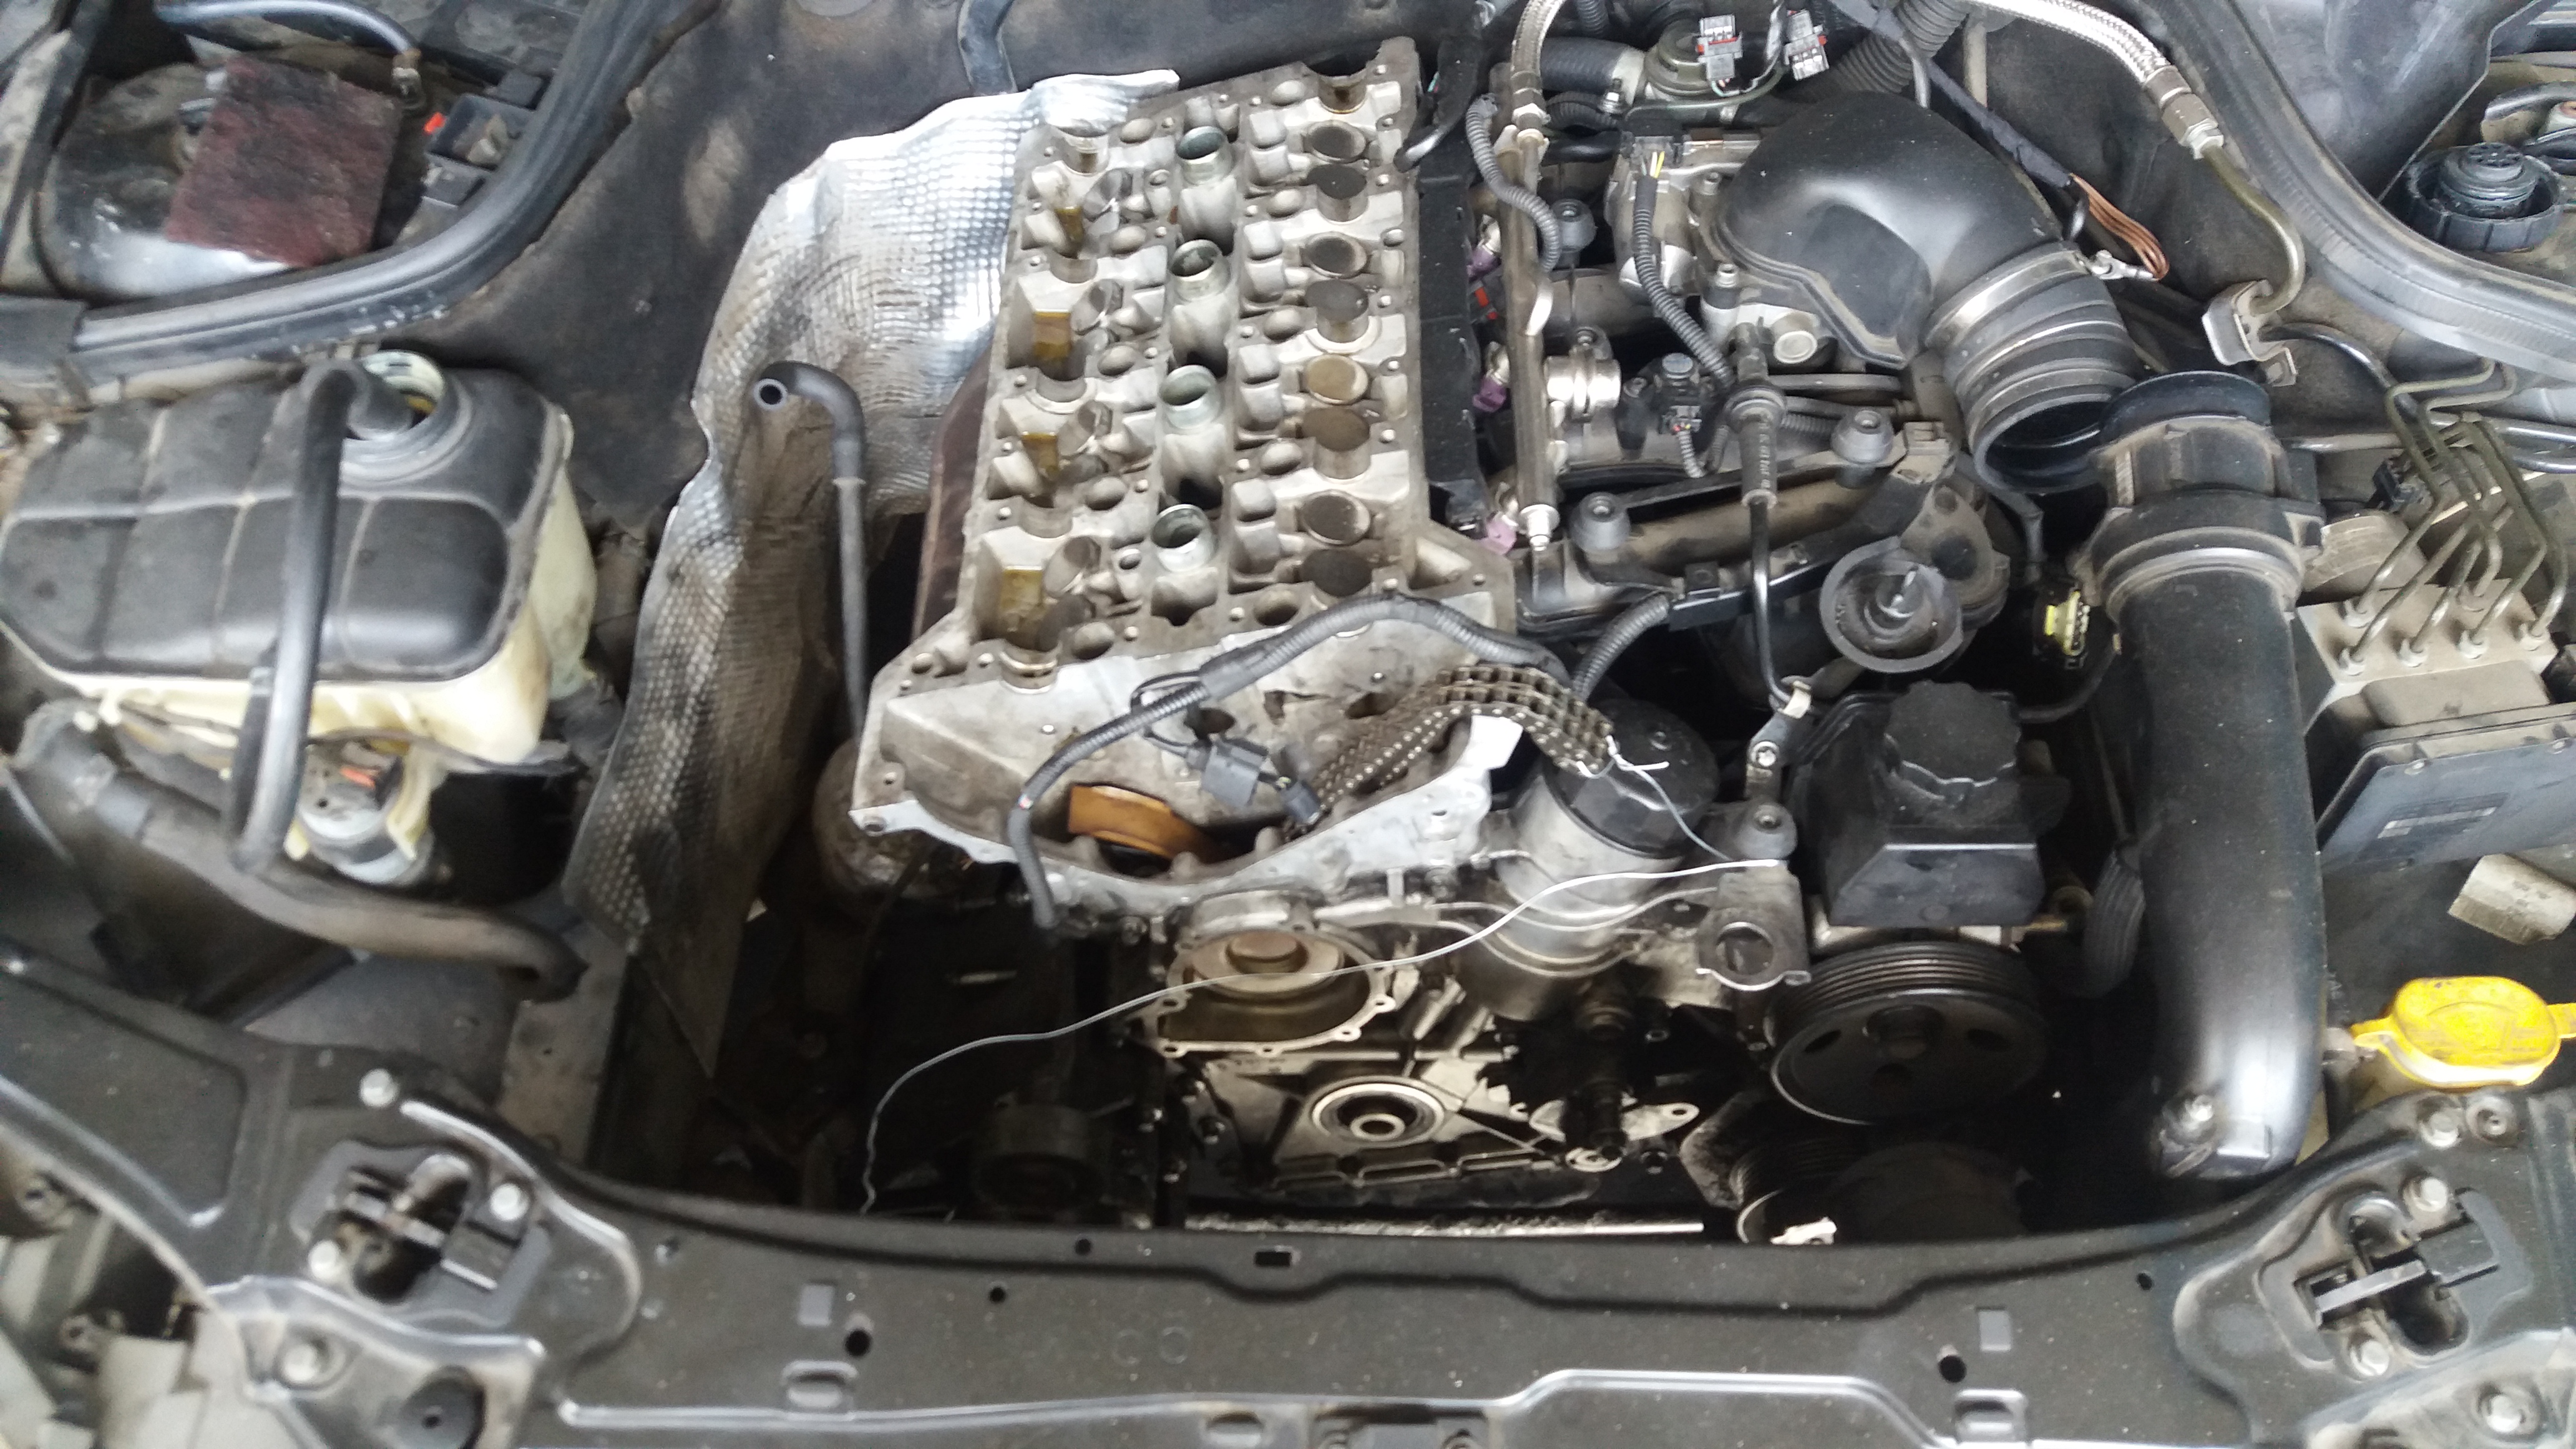 Timing chain issues: repair, replace engine, or engine swap? -   Forums